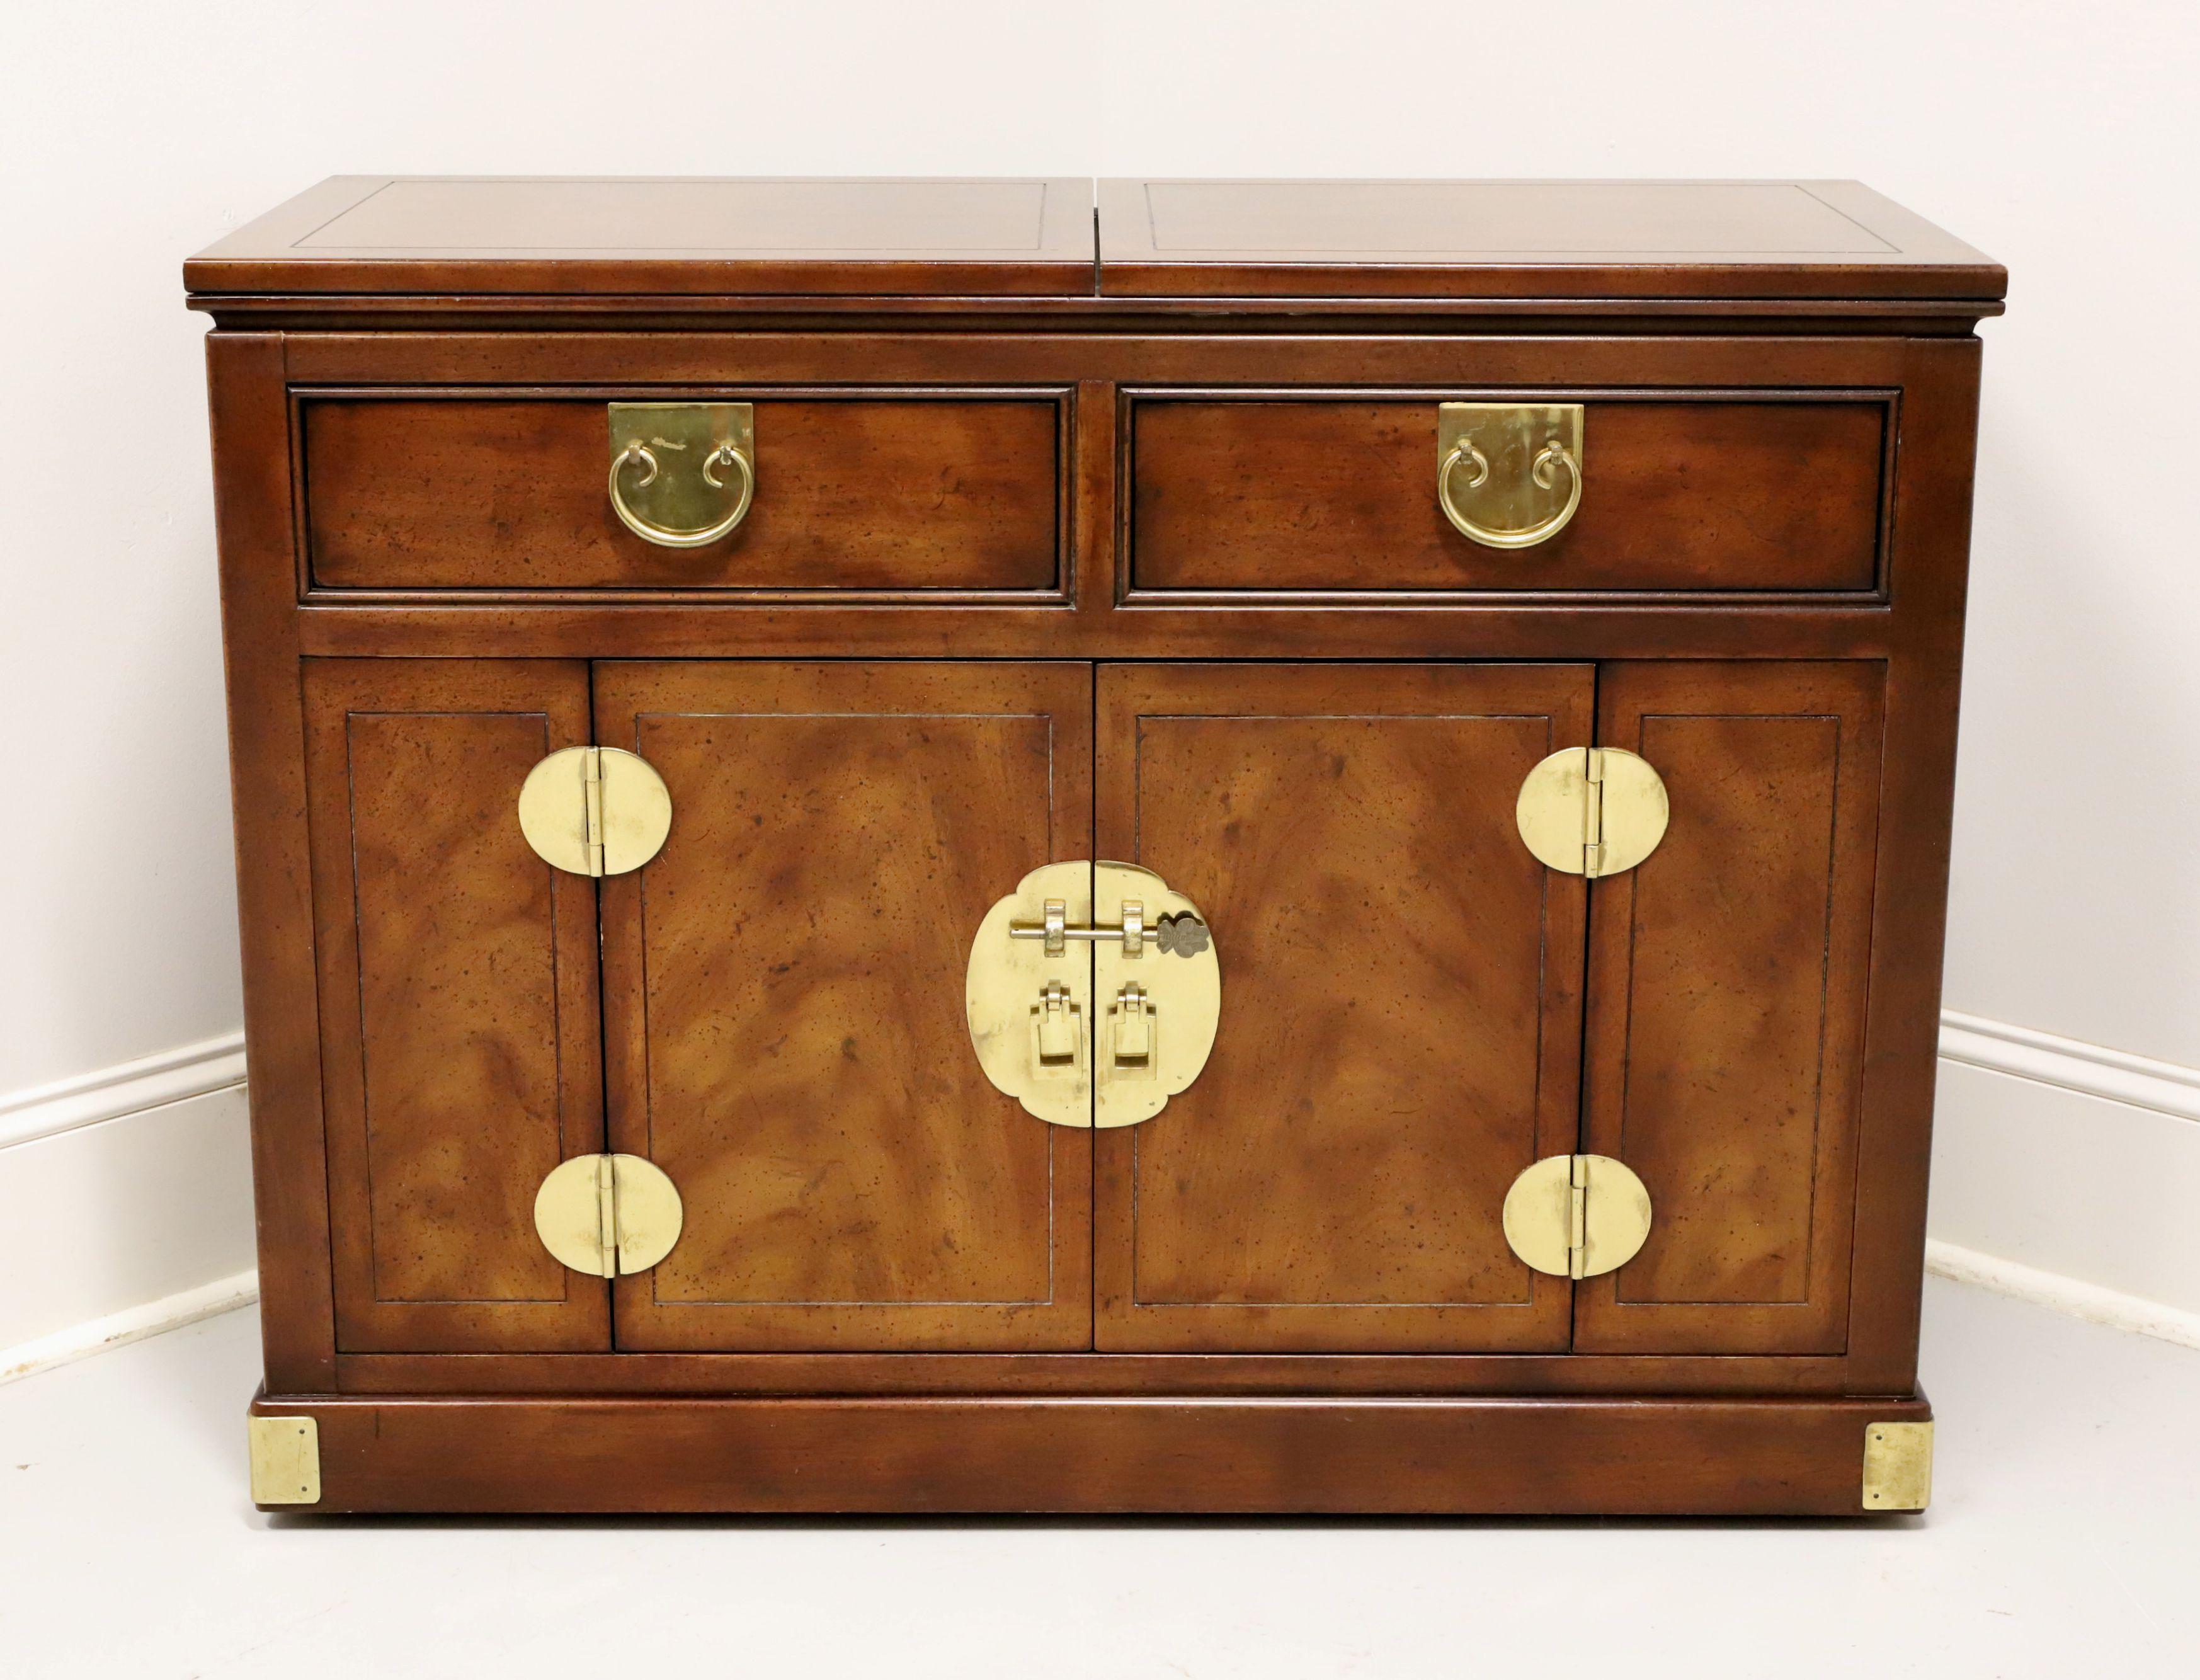 An Asian Chinoiserie style server by Henredon. Mahogany, composite surface under the flip out top, decorative brass hardware & accents, and on casters. Features two drawers of dovetail construction over a two door cabinet revealing a storage area